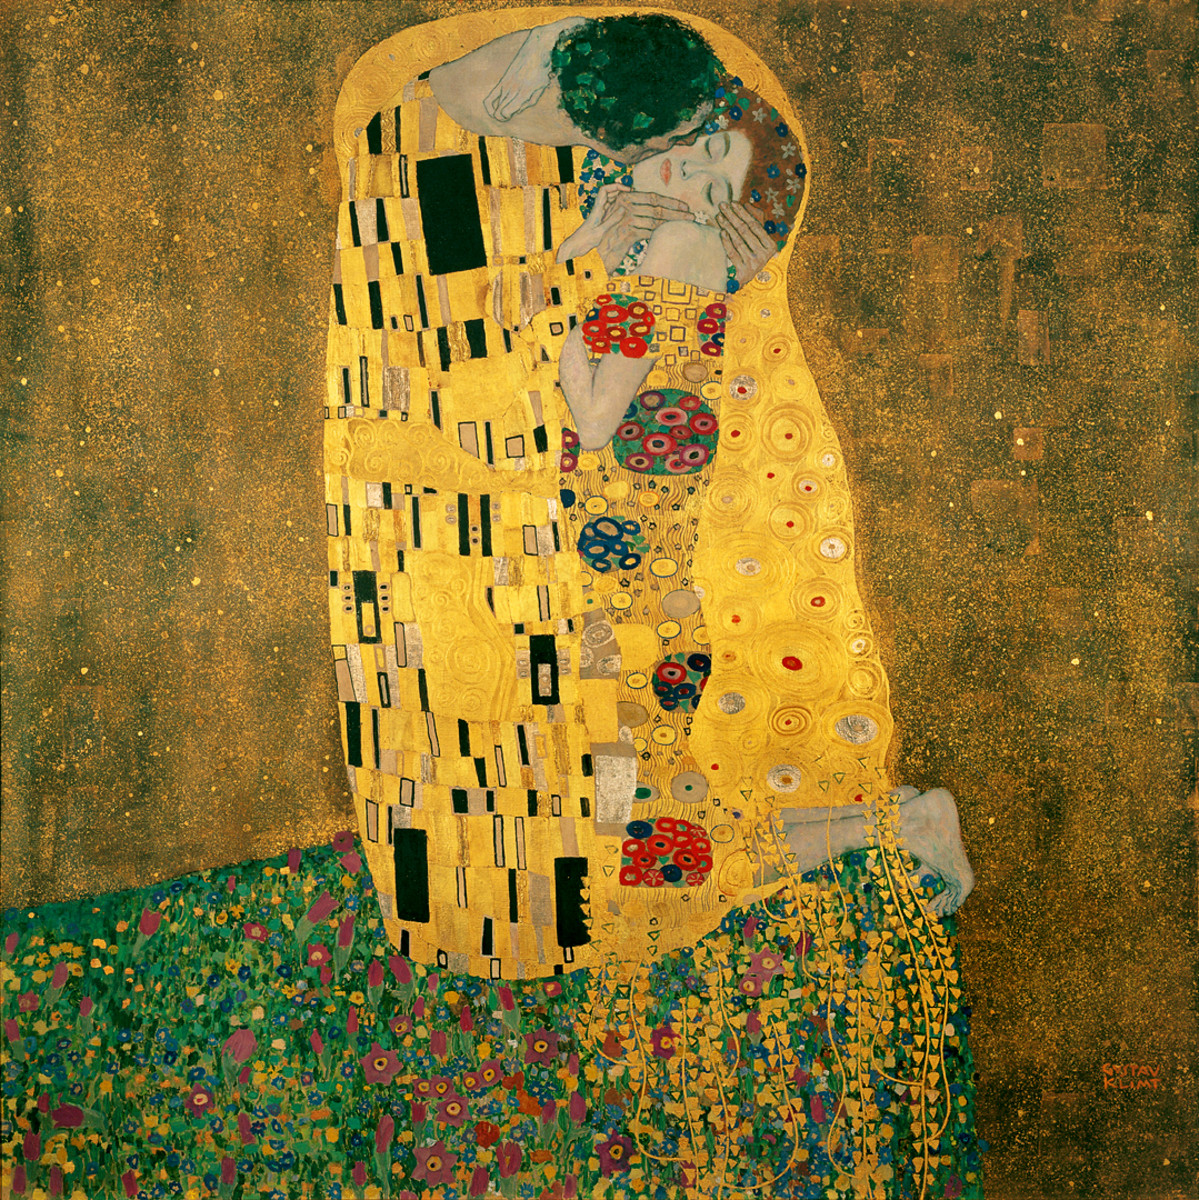 Gustav Klimt's "The Kiss" shows the passion and devotion present in a Leo-Virgo relationship.